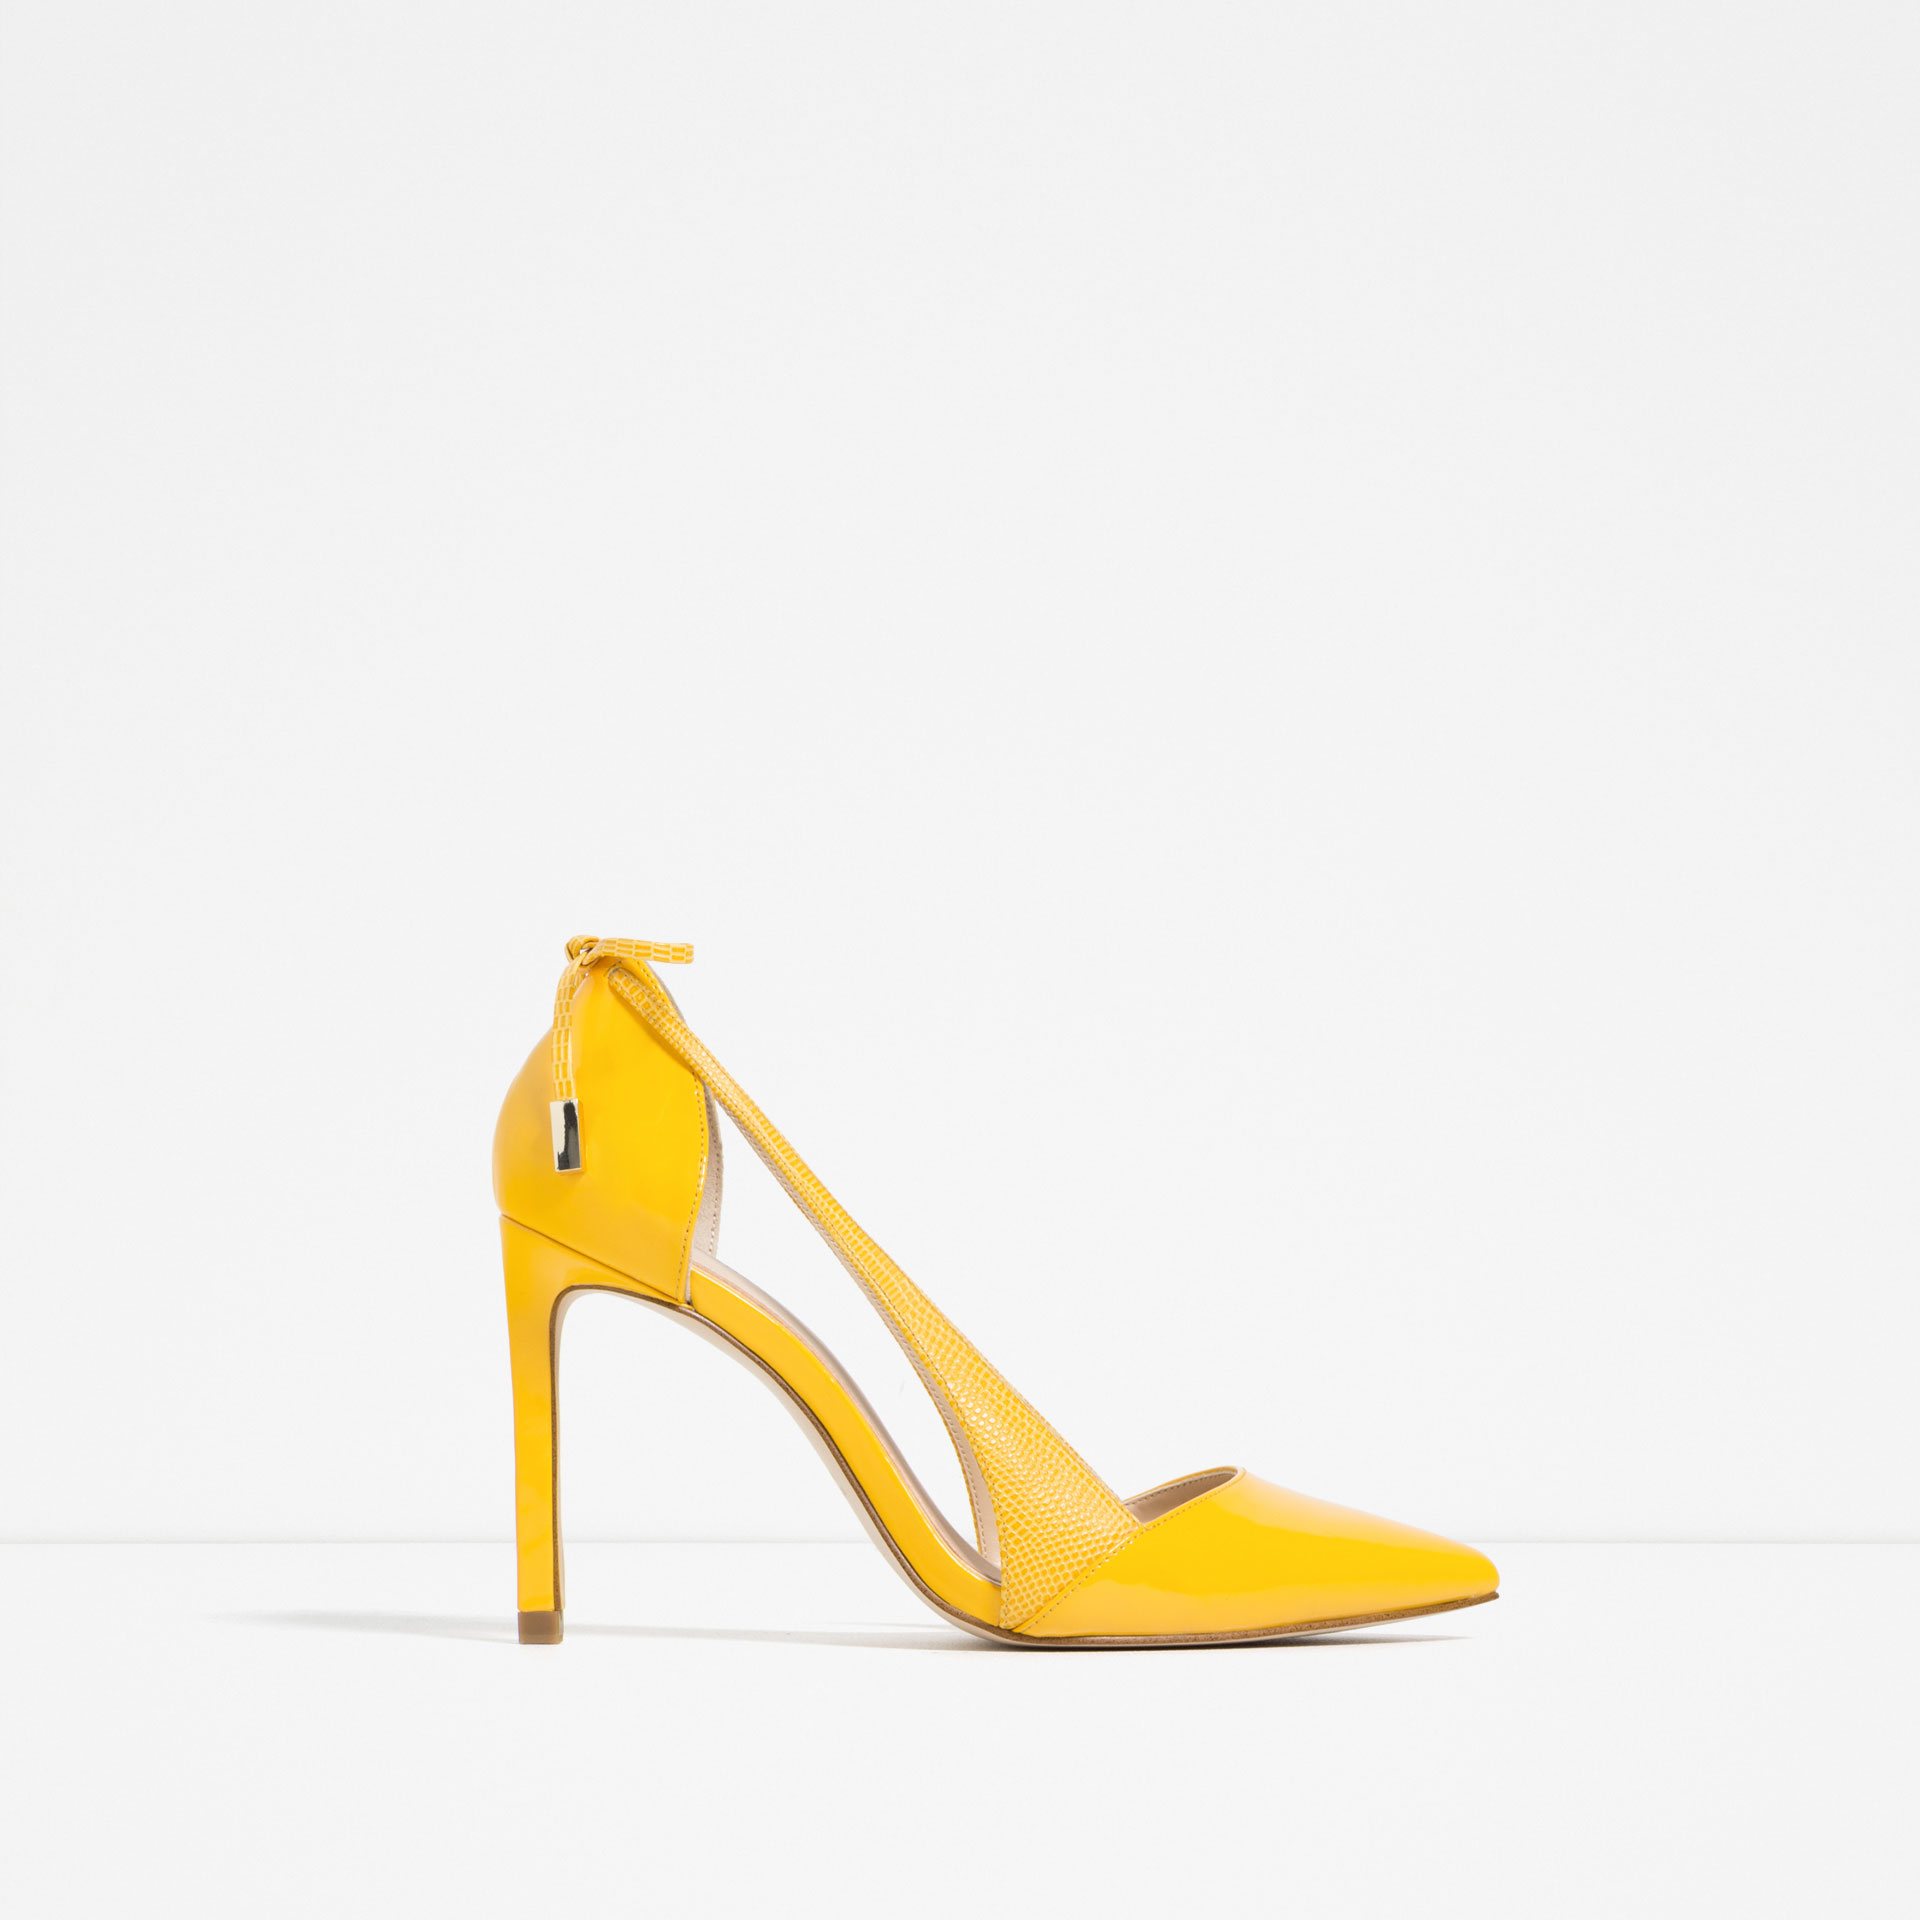 Zara High  Heel  Shoes  With Bow in Yellow  Lyst